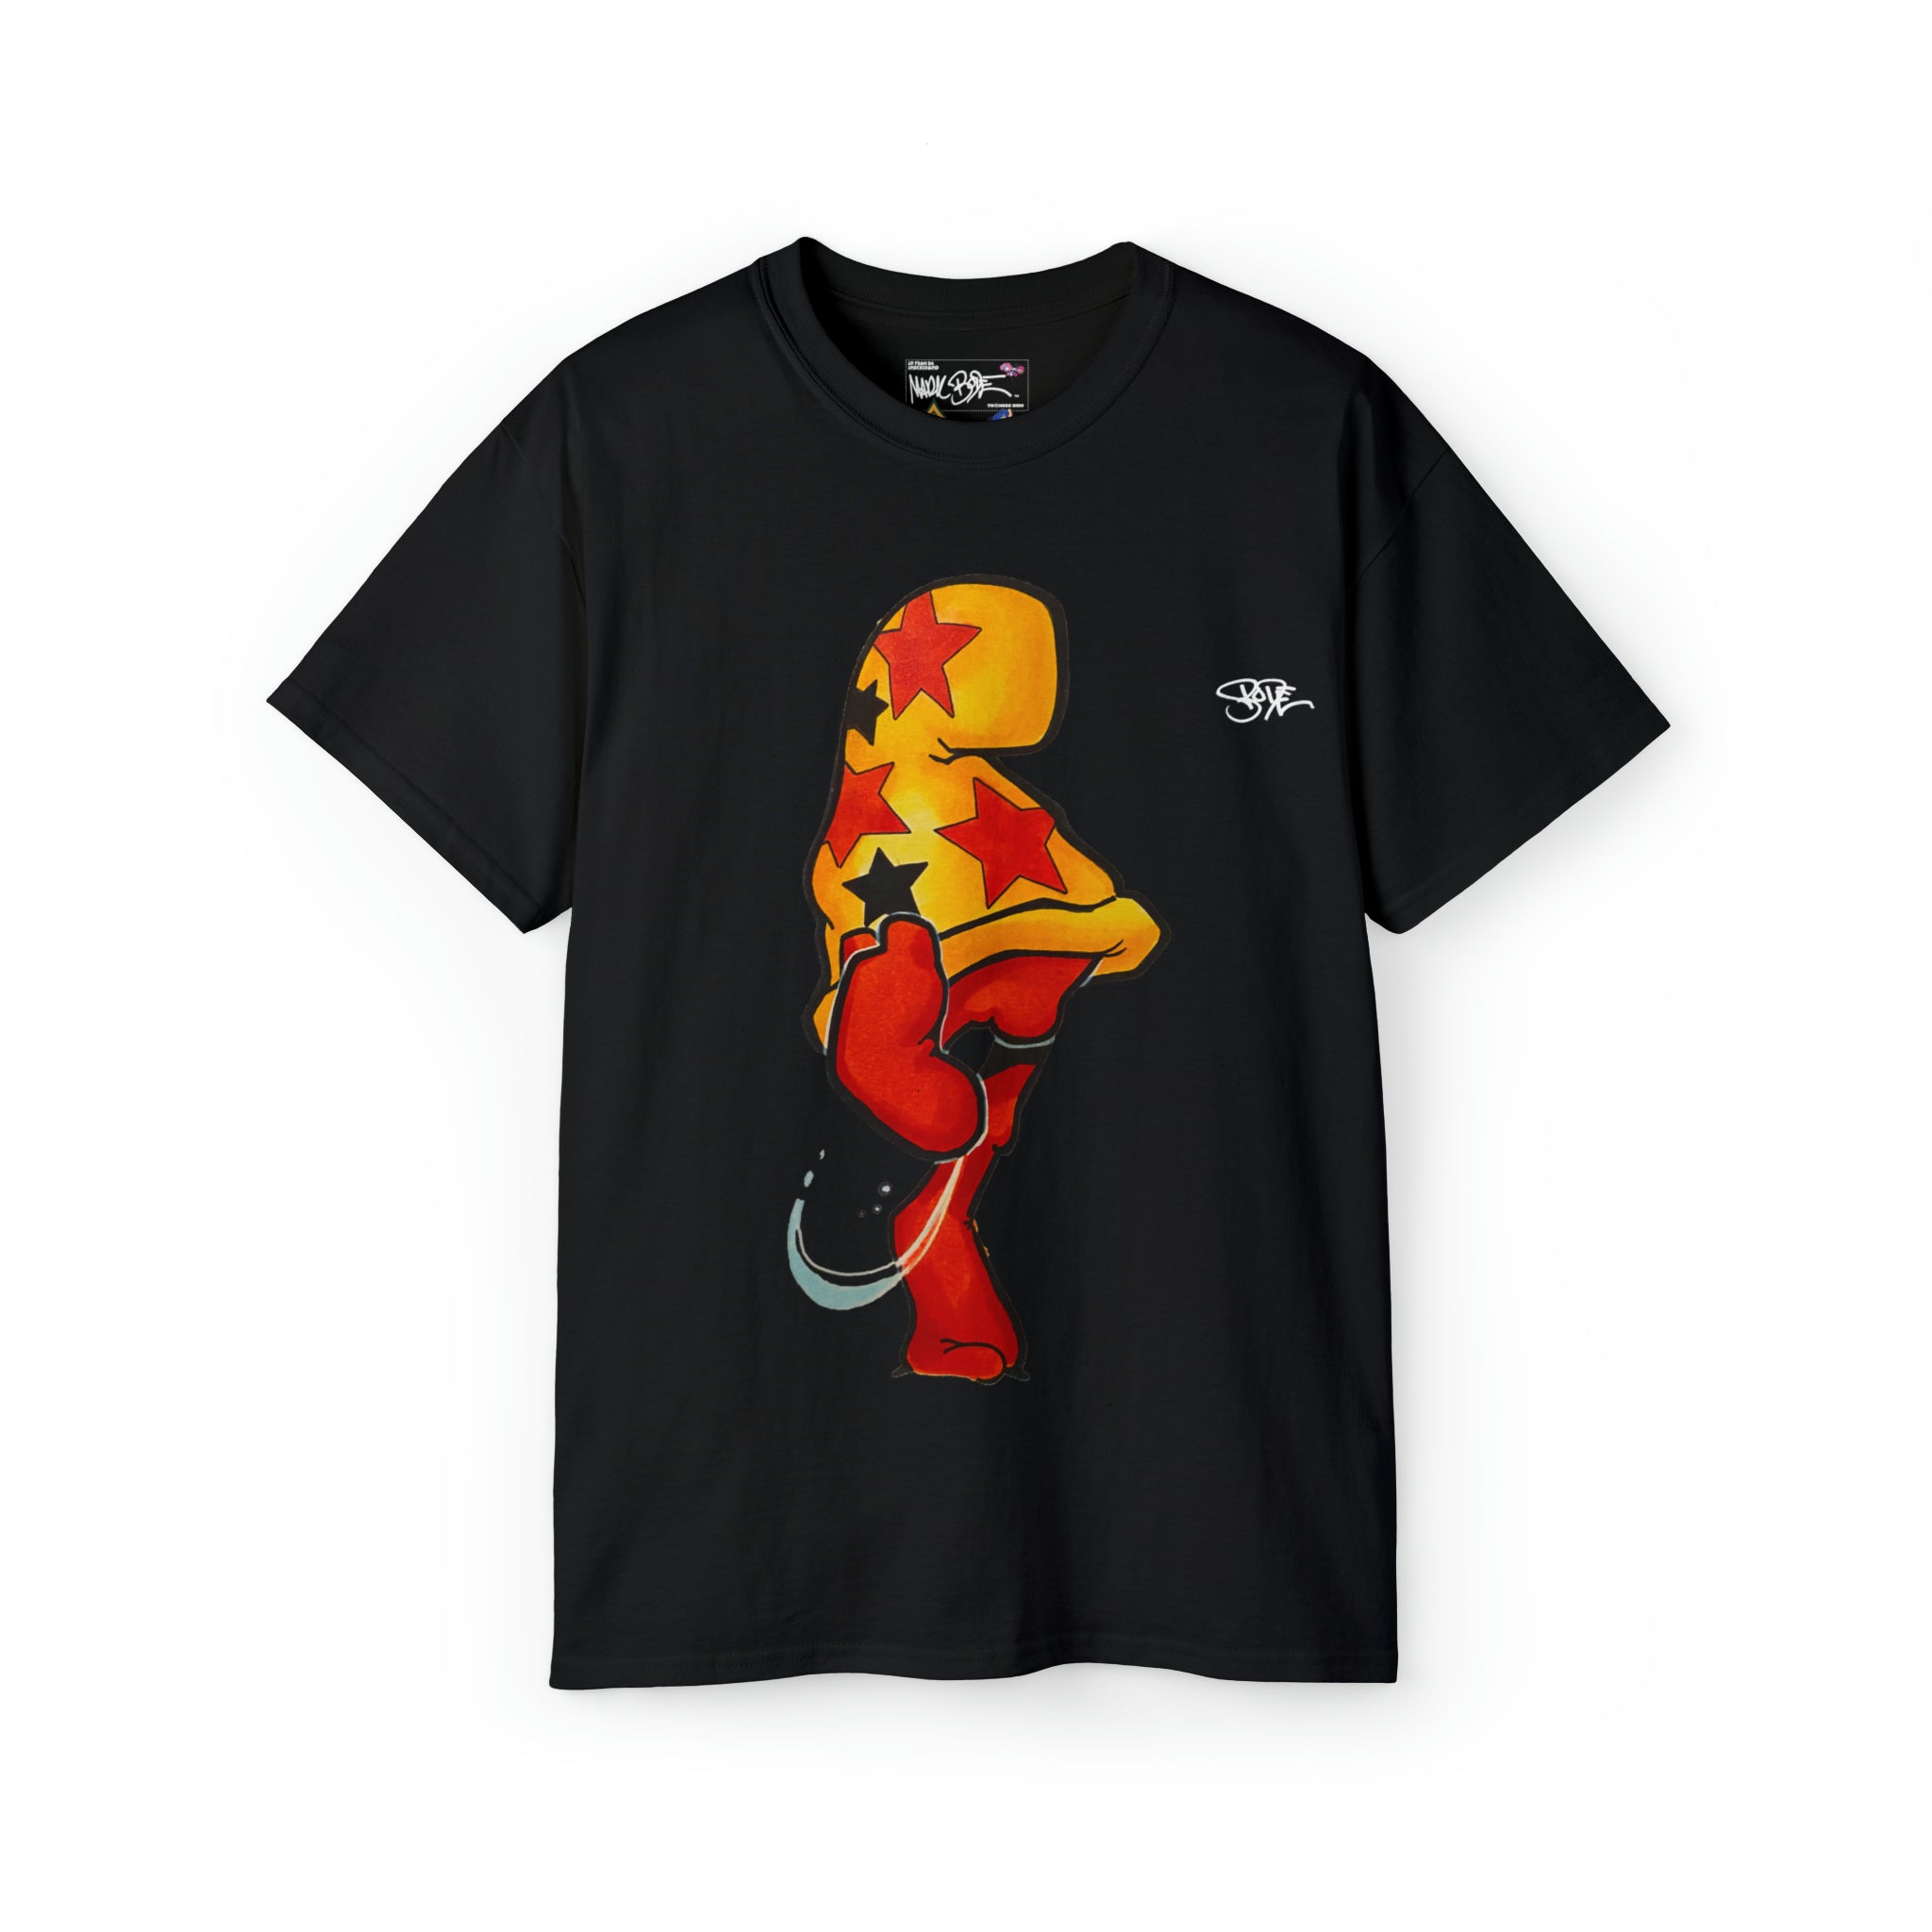 Bode Creed "Classic Cheech Drawing" Limited Edition Tee Black